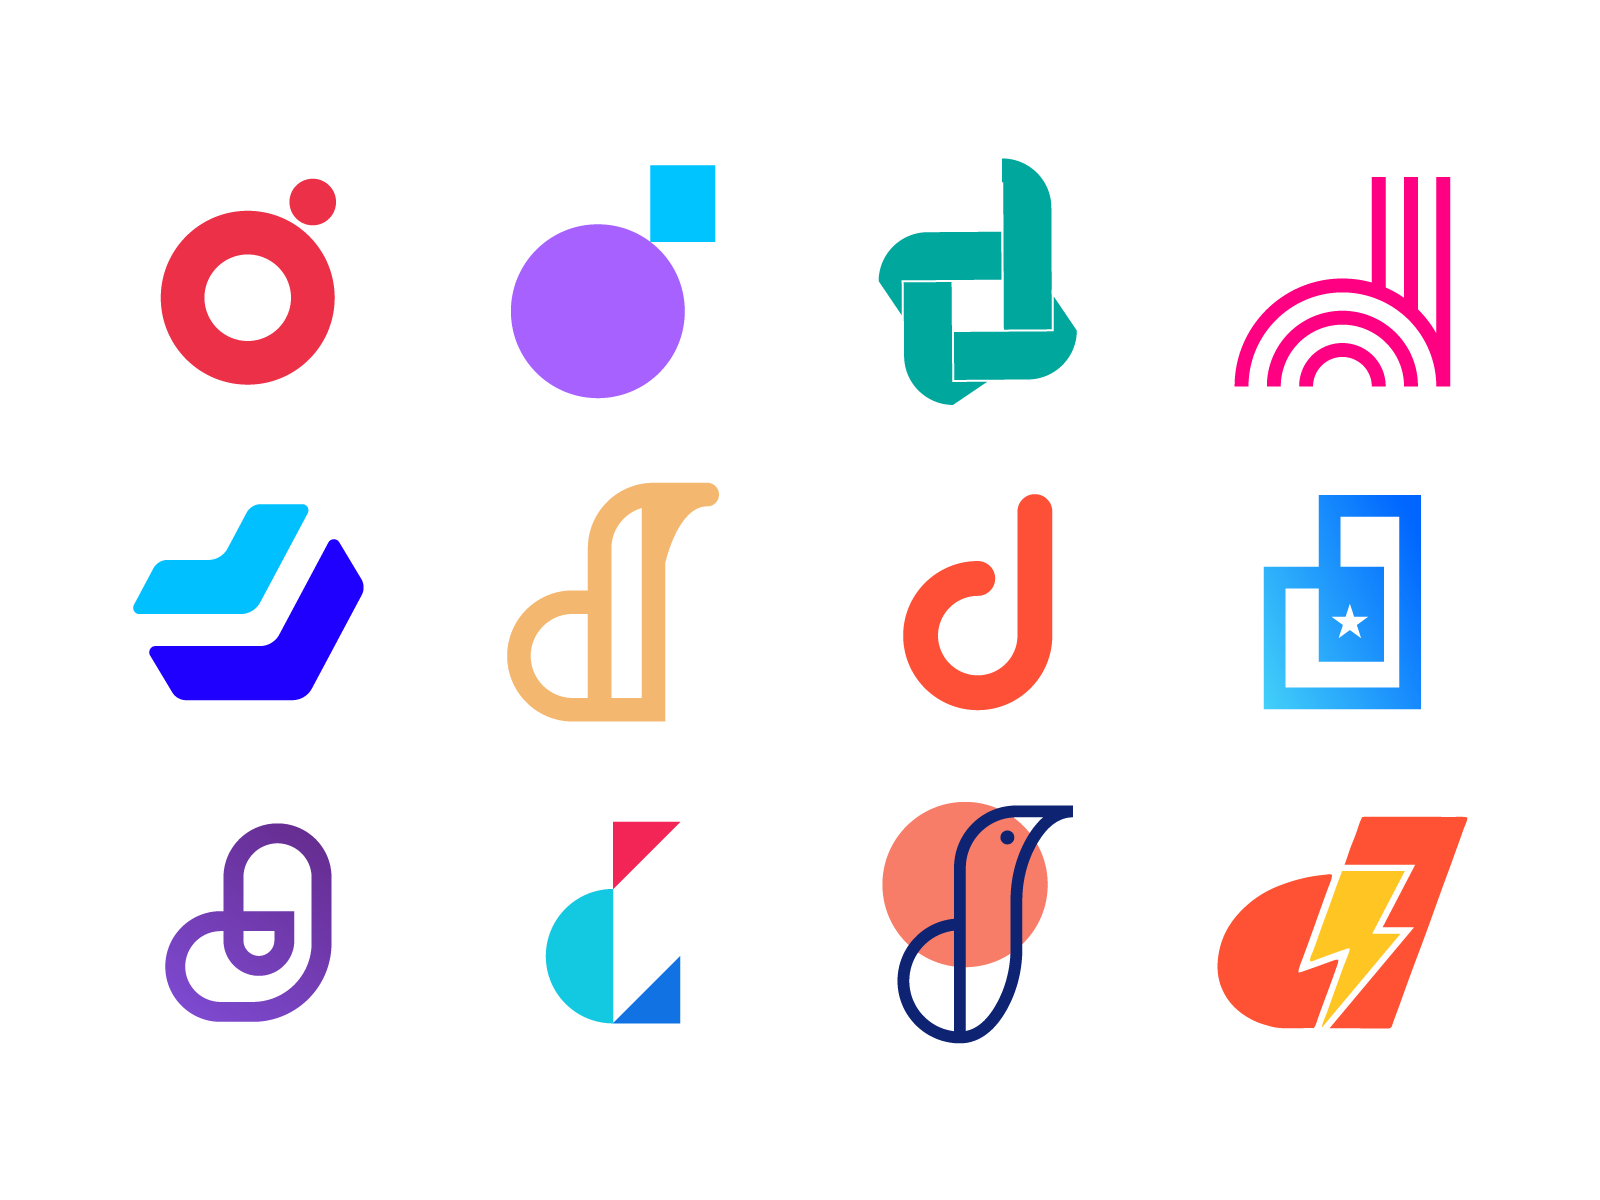 d lowercase exploration by Alaa choichnia on Dribbble